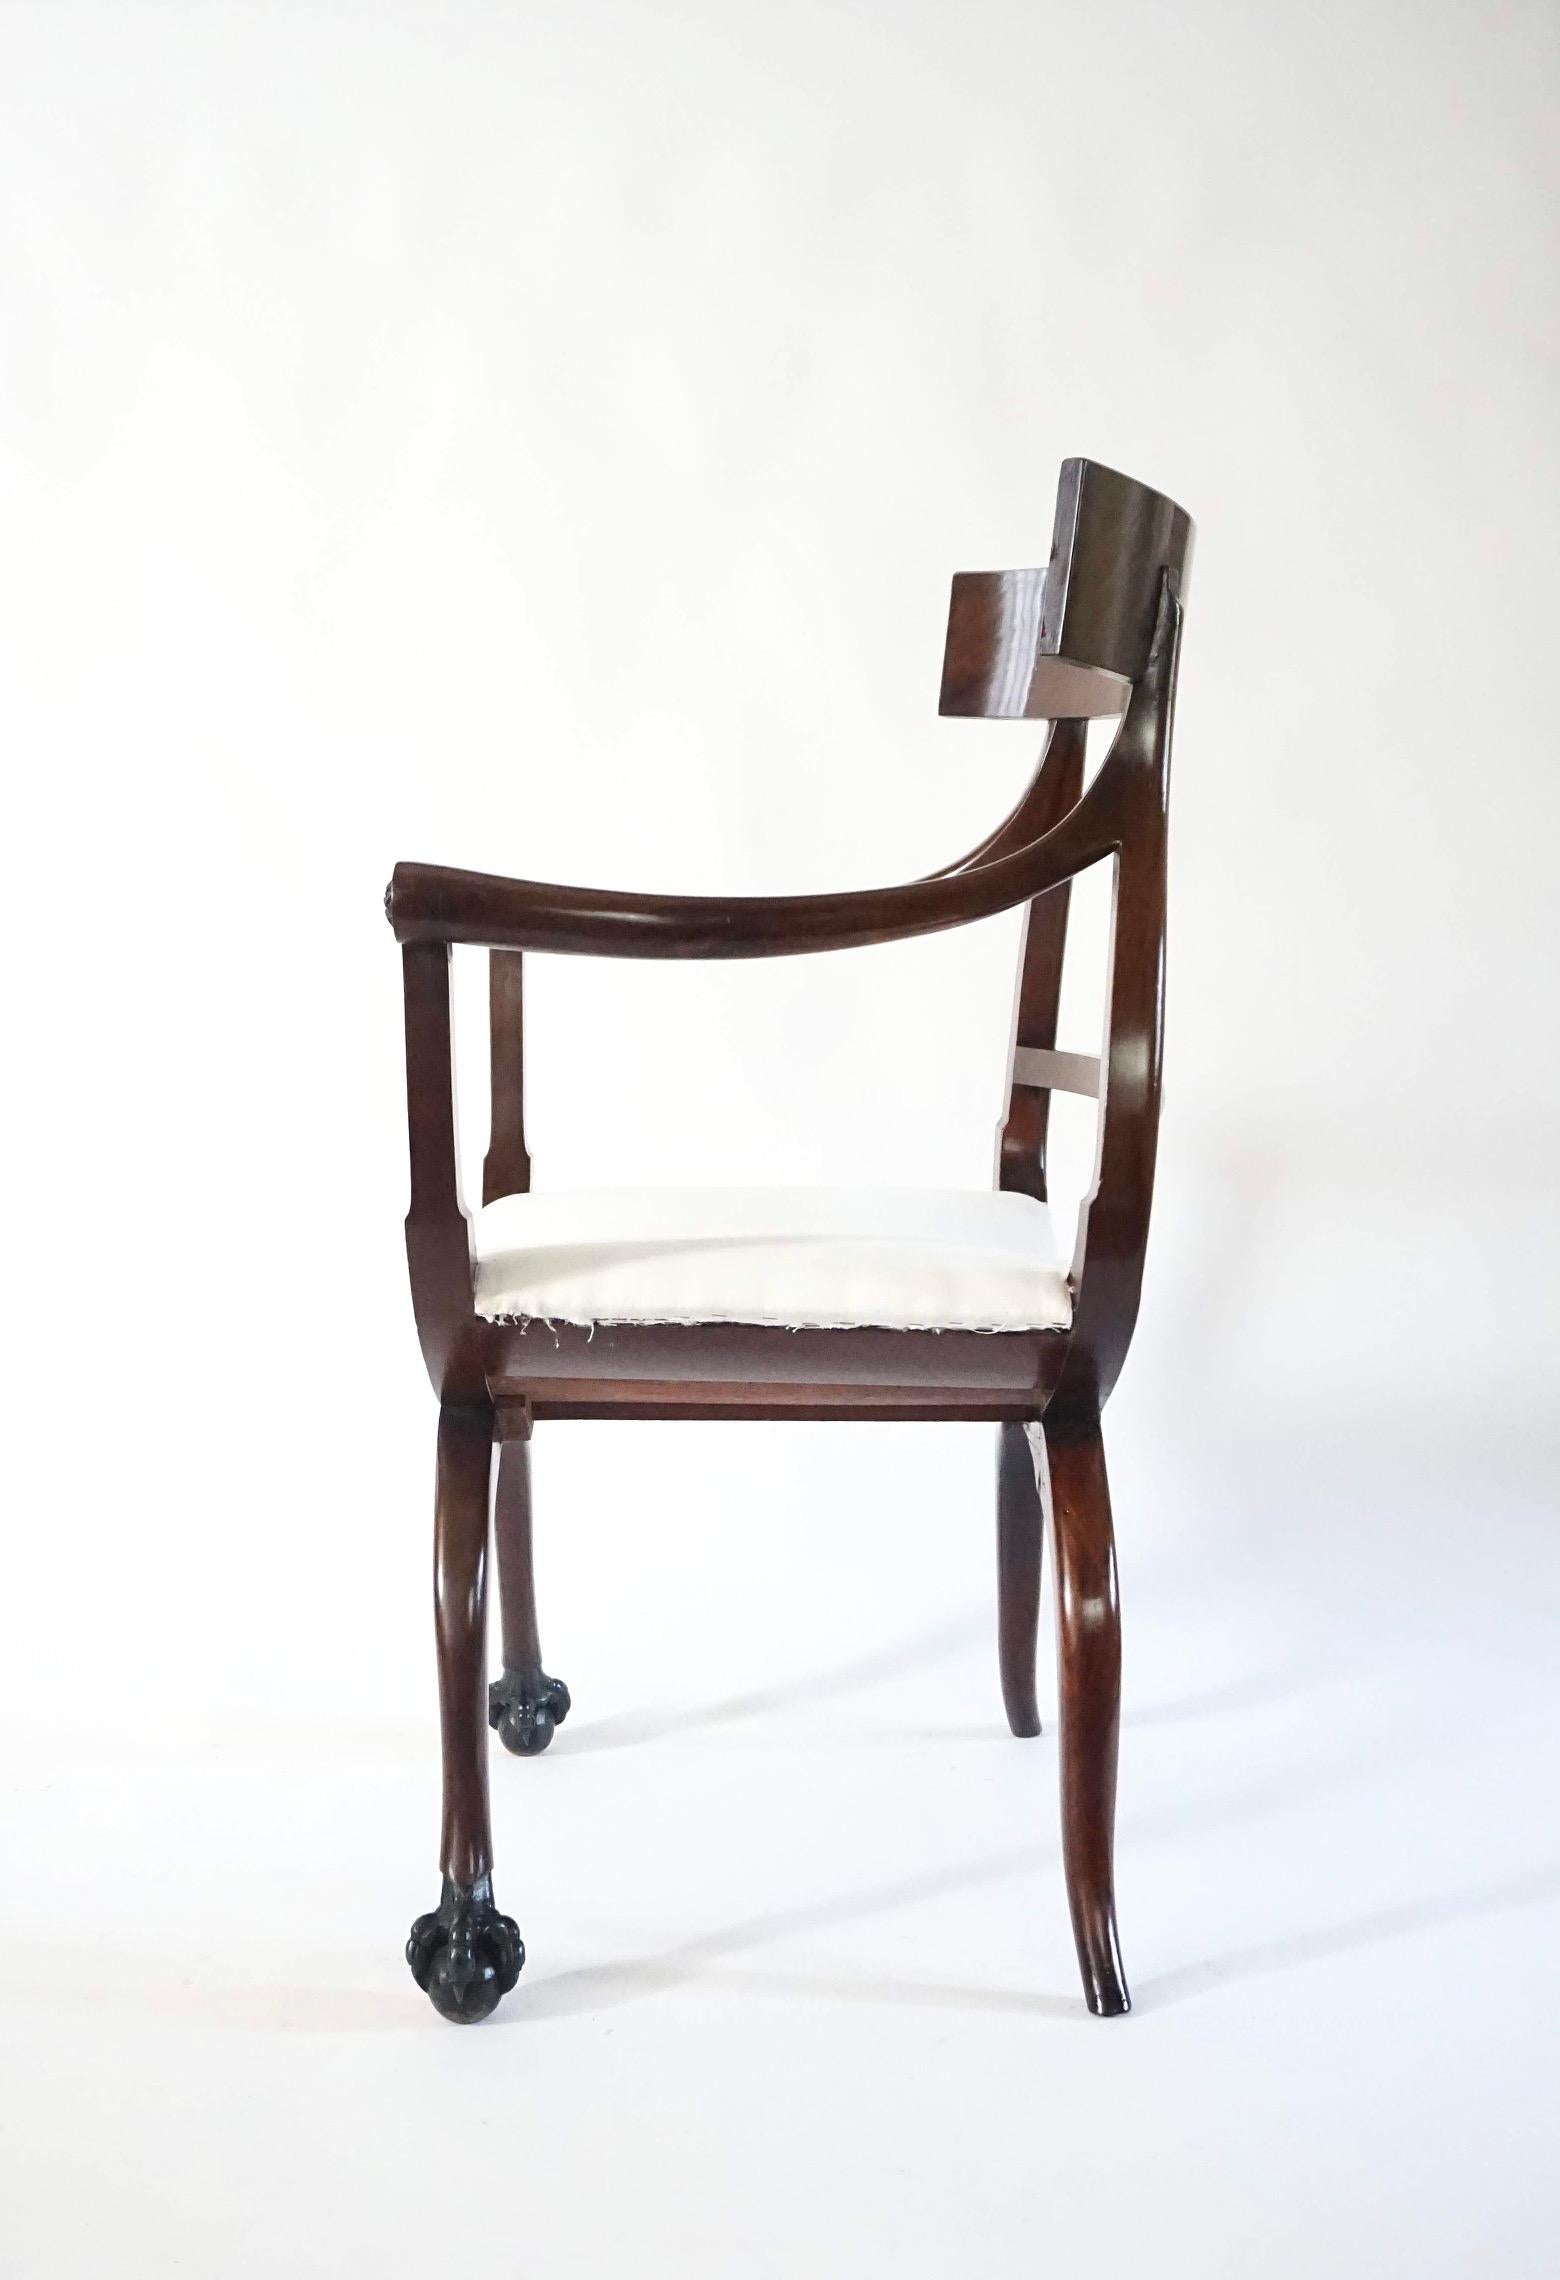 Russian Neoclassical Mahogany Armchairs, Pair, circa 1800 For Sale 4